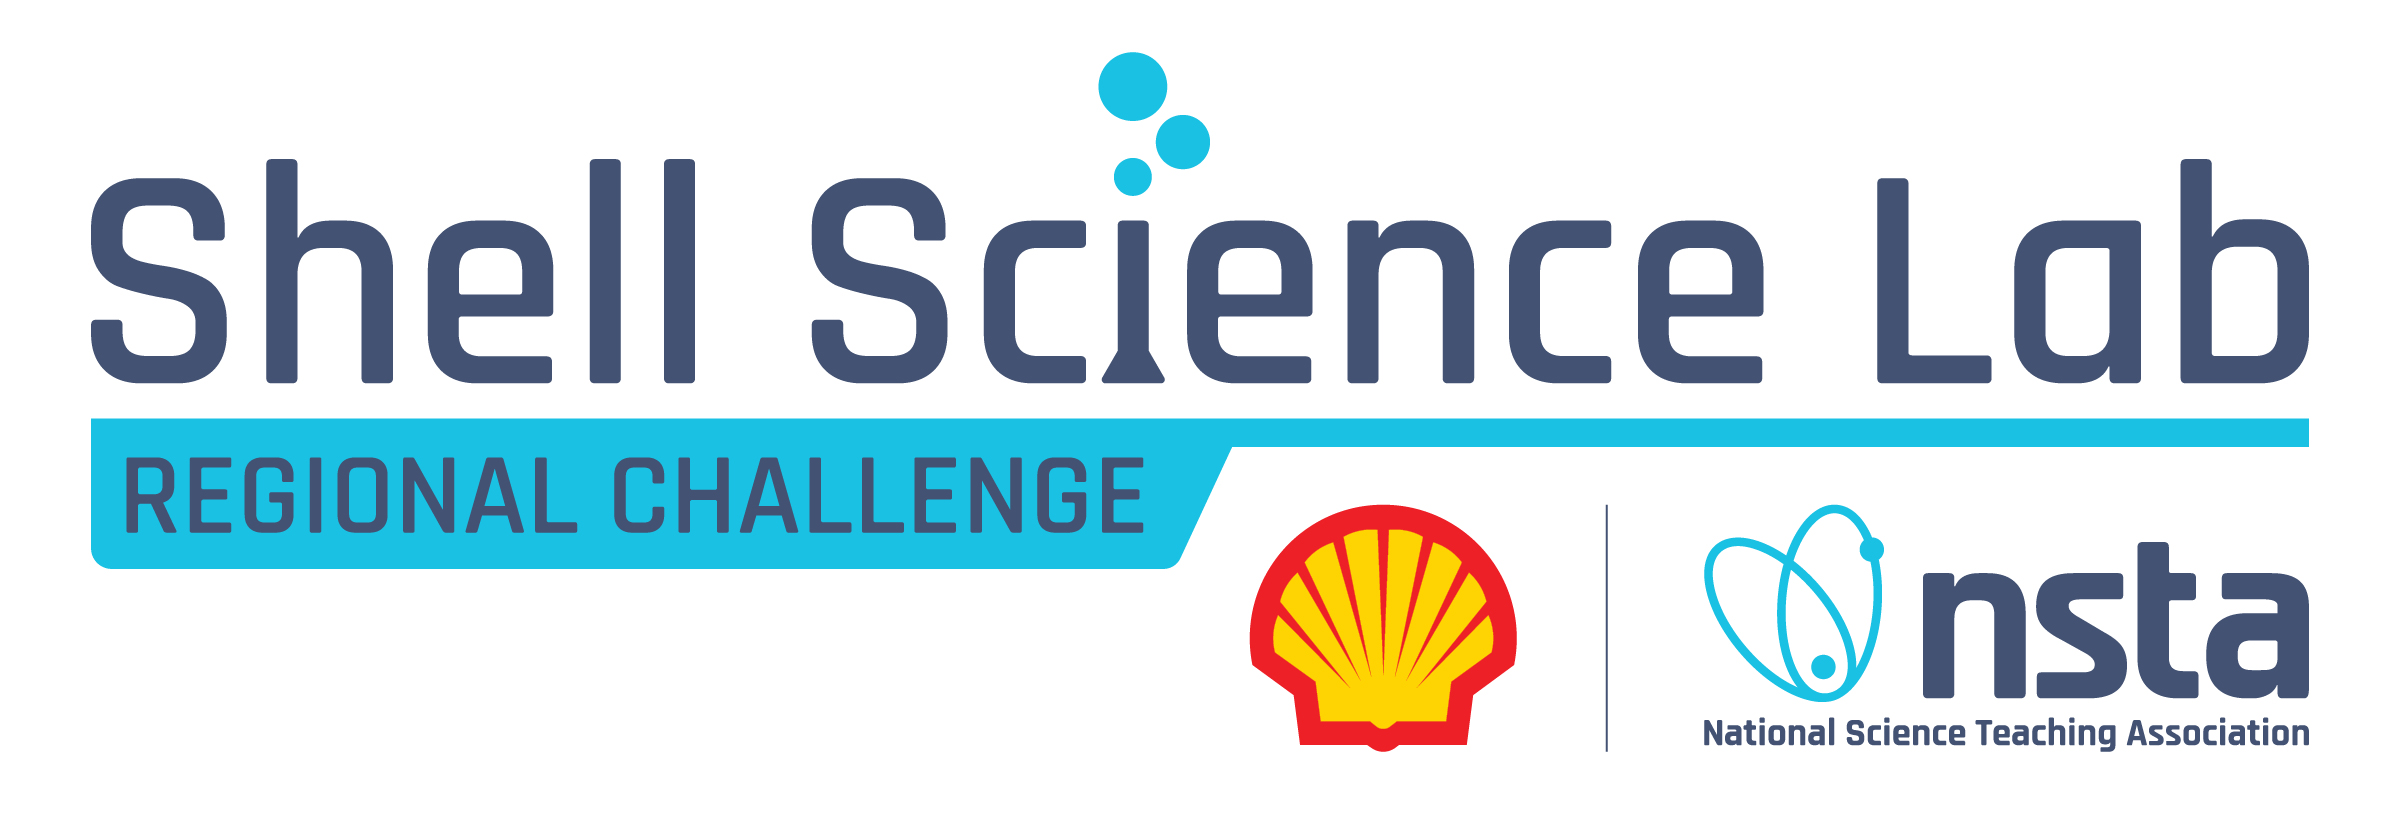 Shell Science Lab